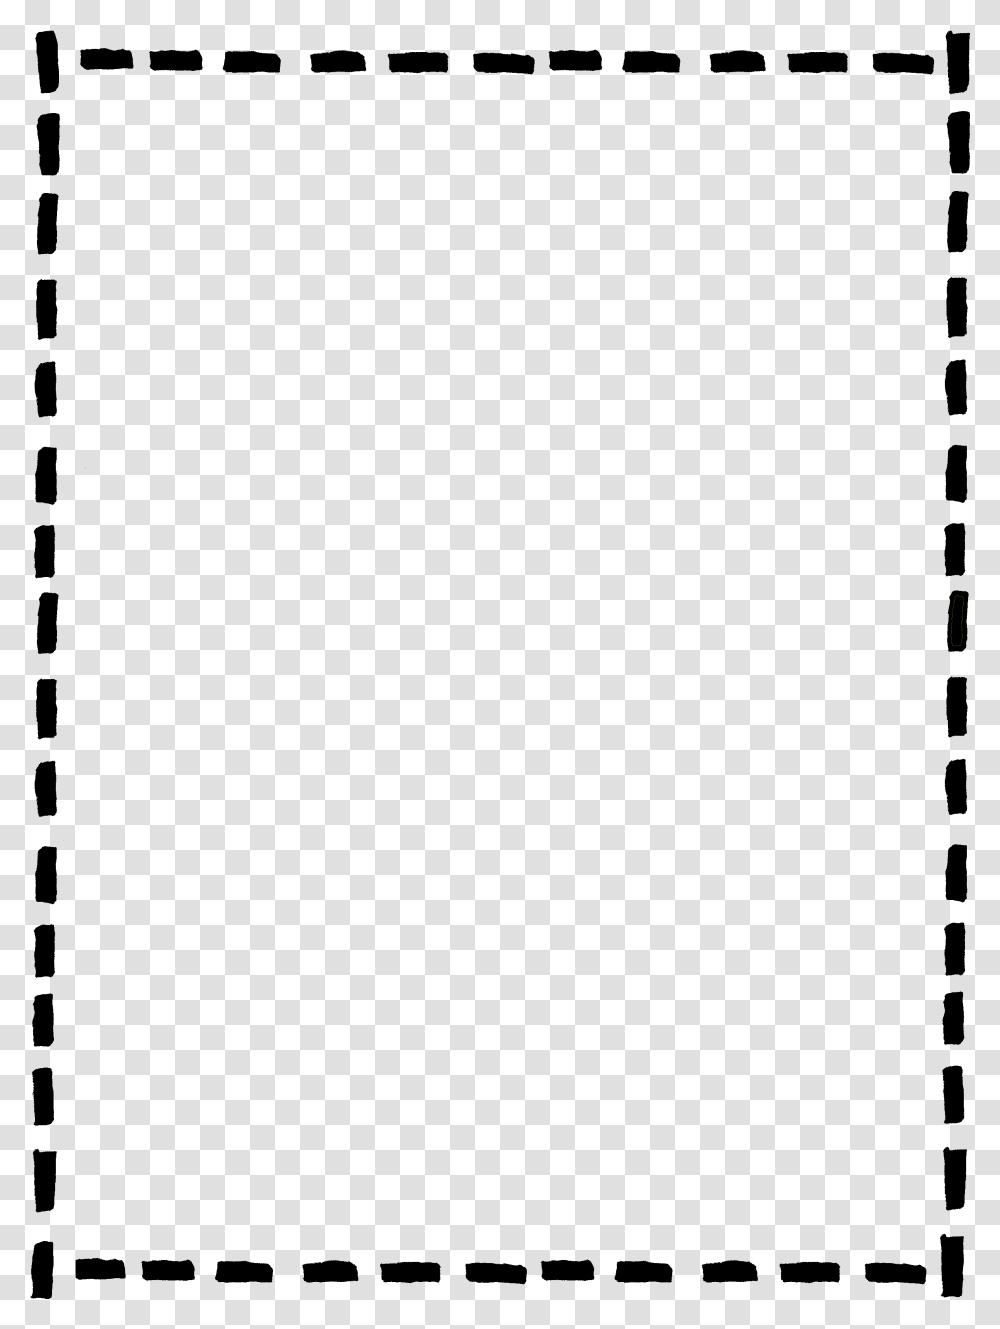 Borders And Frames Black Picture Frame Clip Art Black And White Border, Nature, Outdoors, Night, Outer Space Transparent Png